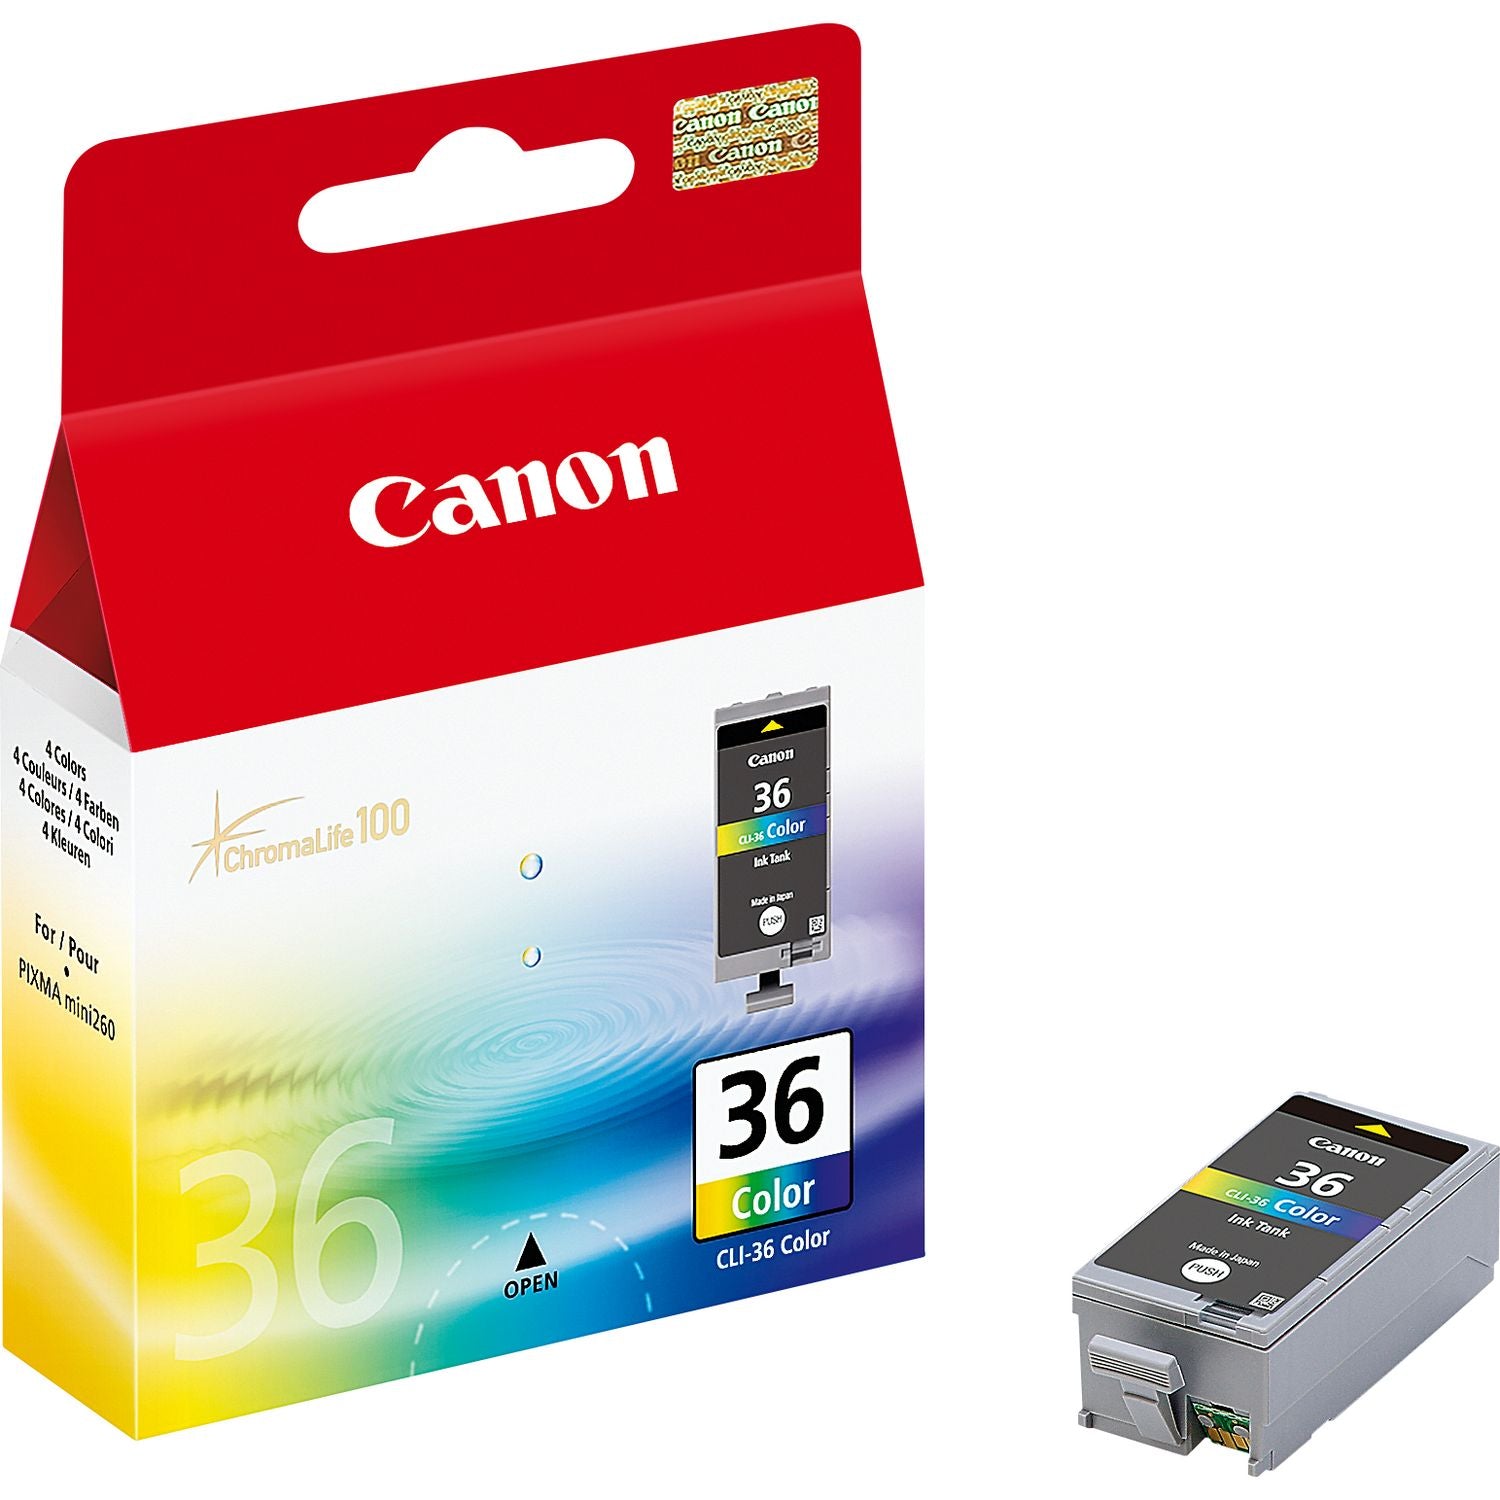 Canon Ink Cartridge for PIXMA iP110 and TR150